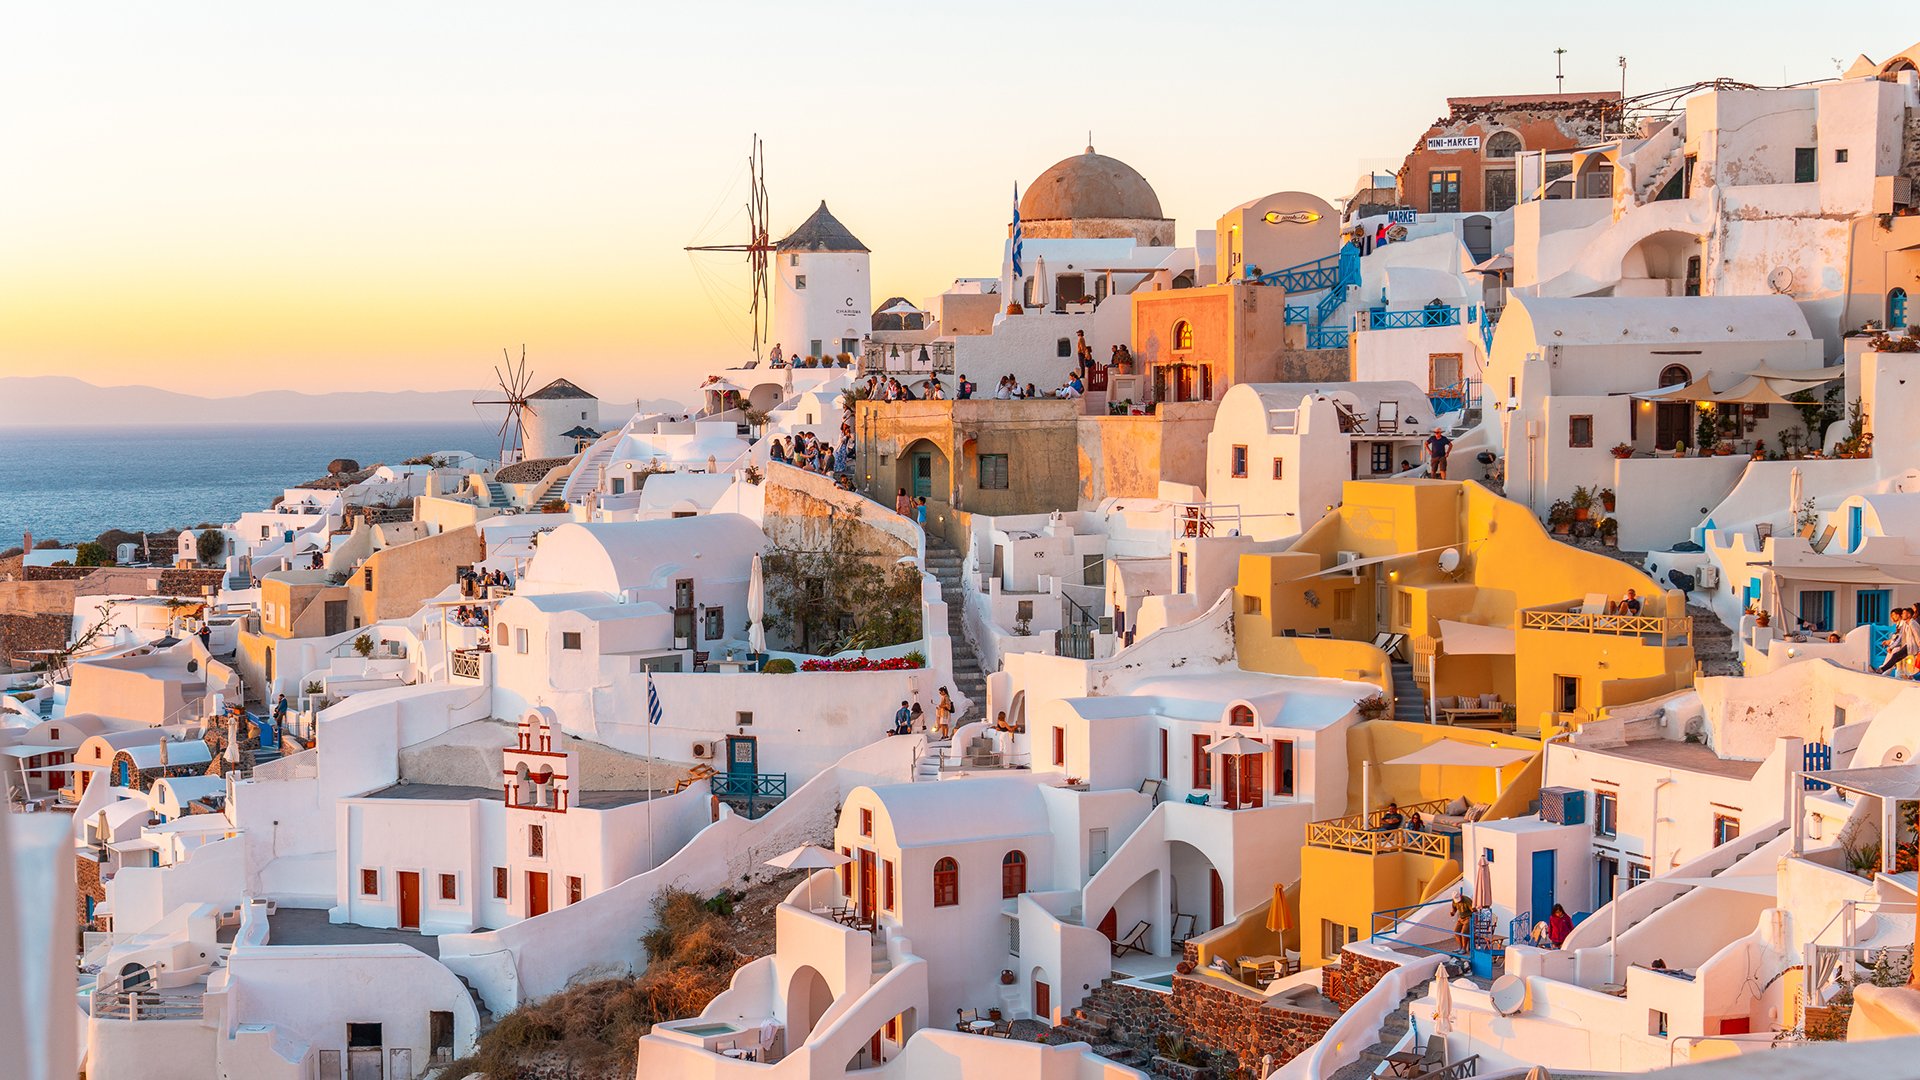 This image shows the iconic buildings of Oia at sunset. Oia boasts one of the most famous sunsets in the Cyclades. 